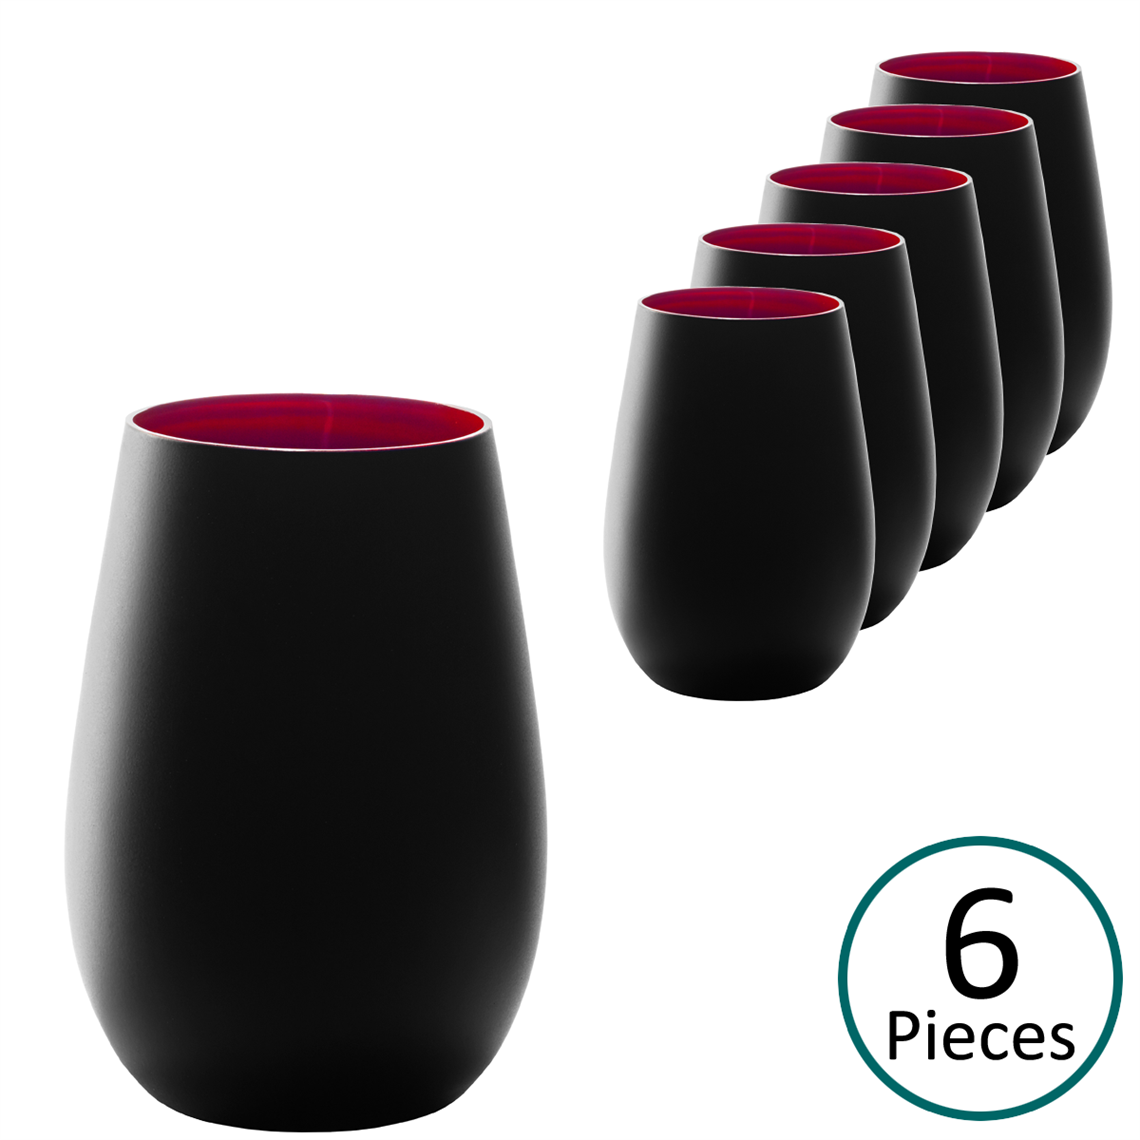 Stolzle Elements Black & Red Water/Mixer Tumbler Glass 465ml - Set of 6